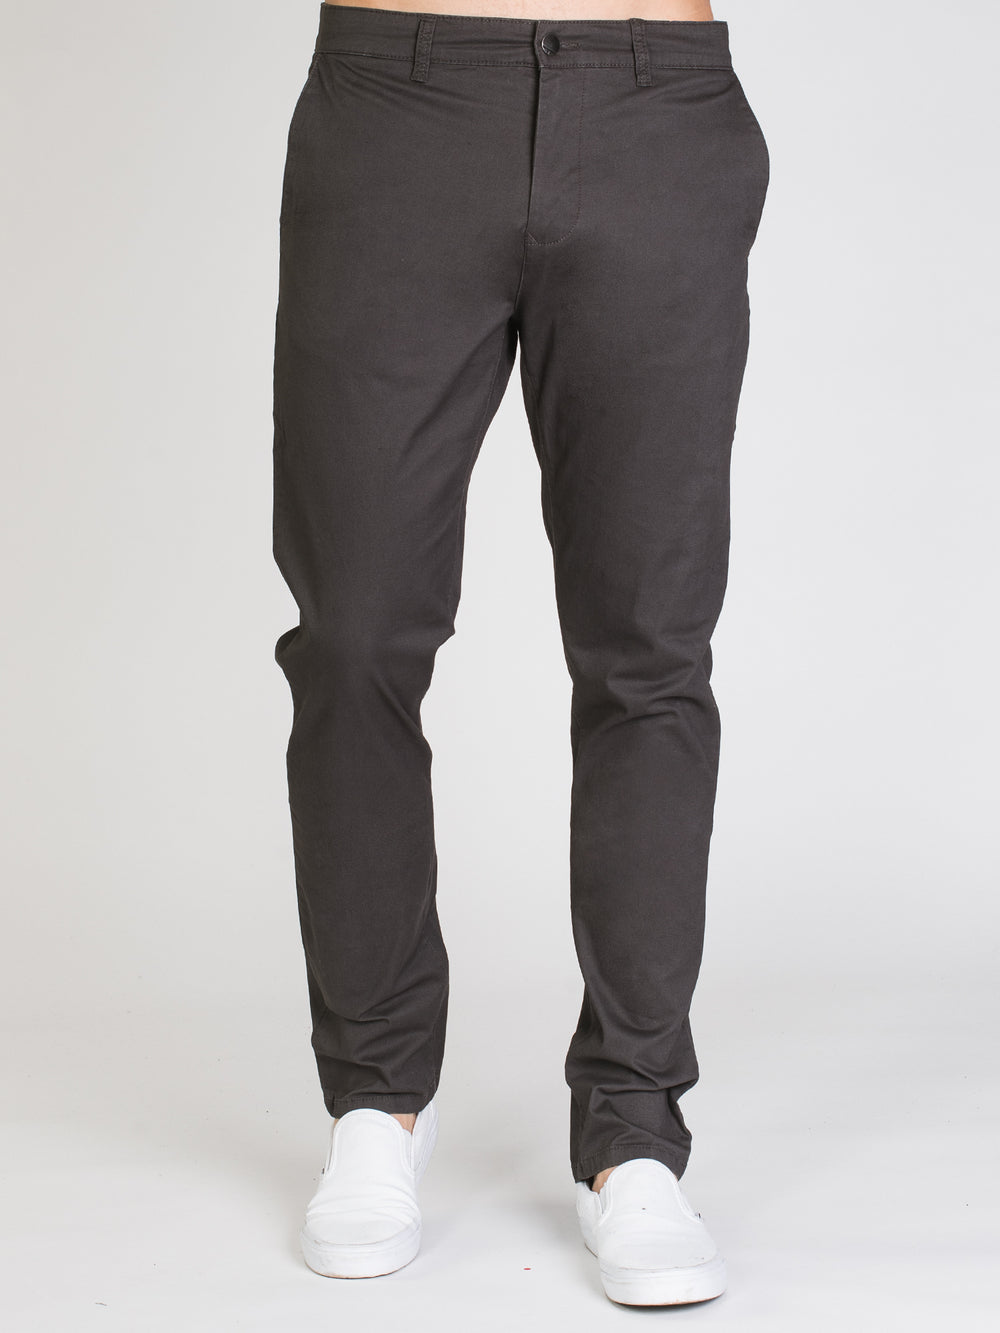 TAINTED SLIM CHINO - CHARCOAL - CLEARANCE